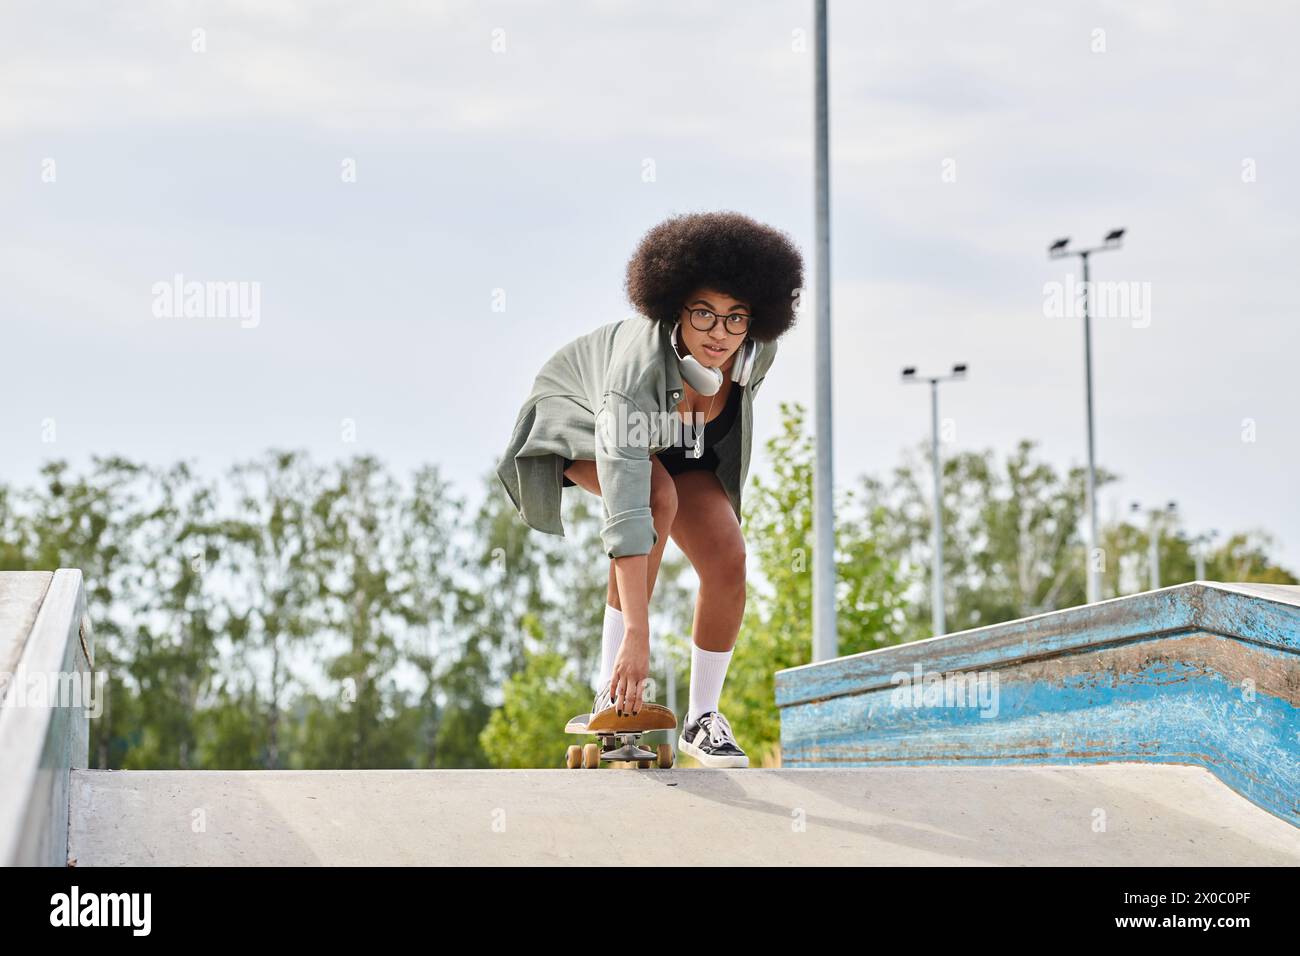 Young African American woman with curly hair skilfully rides a skateboard on a ramp at an outdoor skate park. Stock Photo